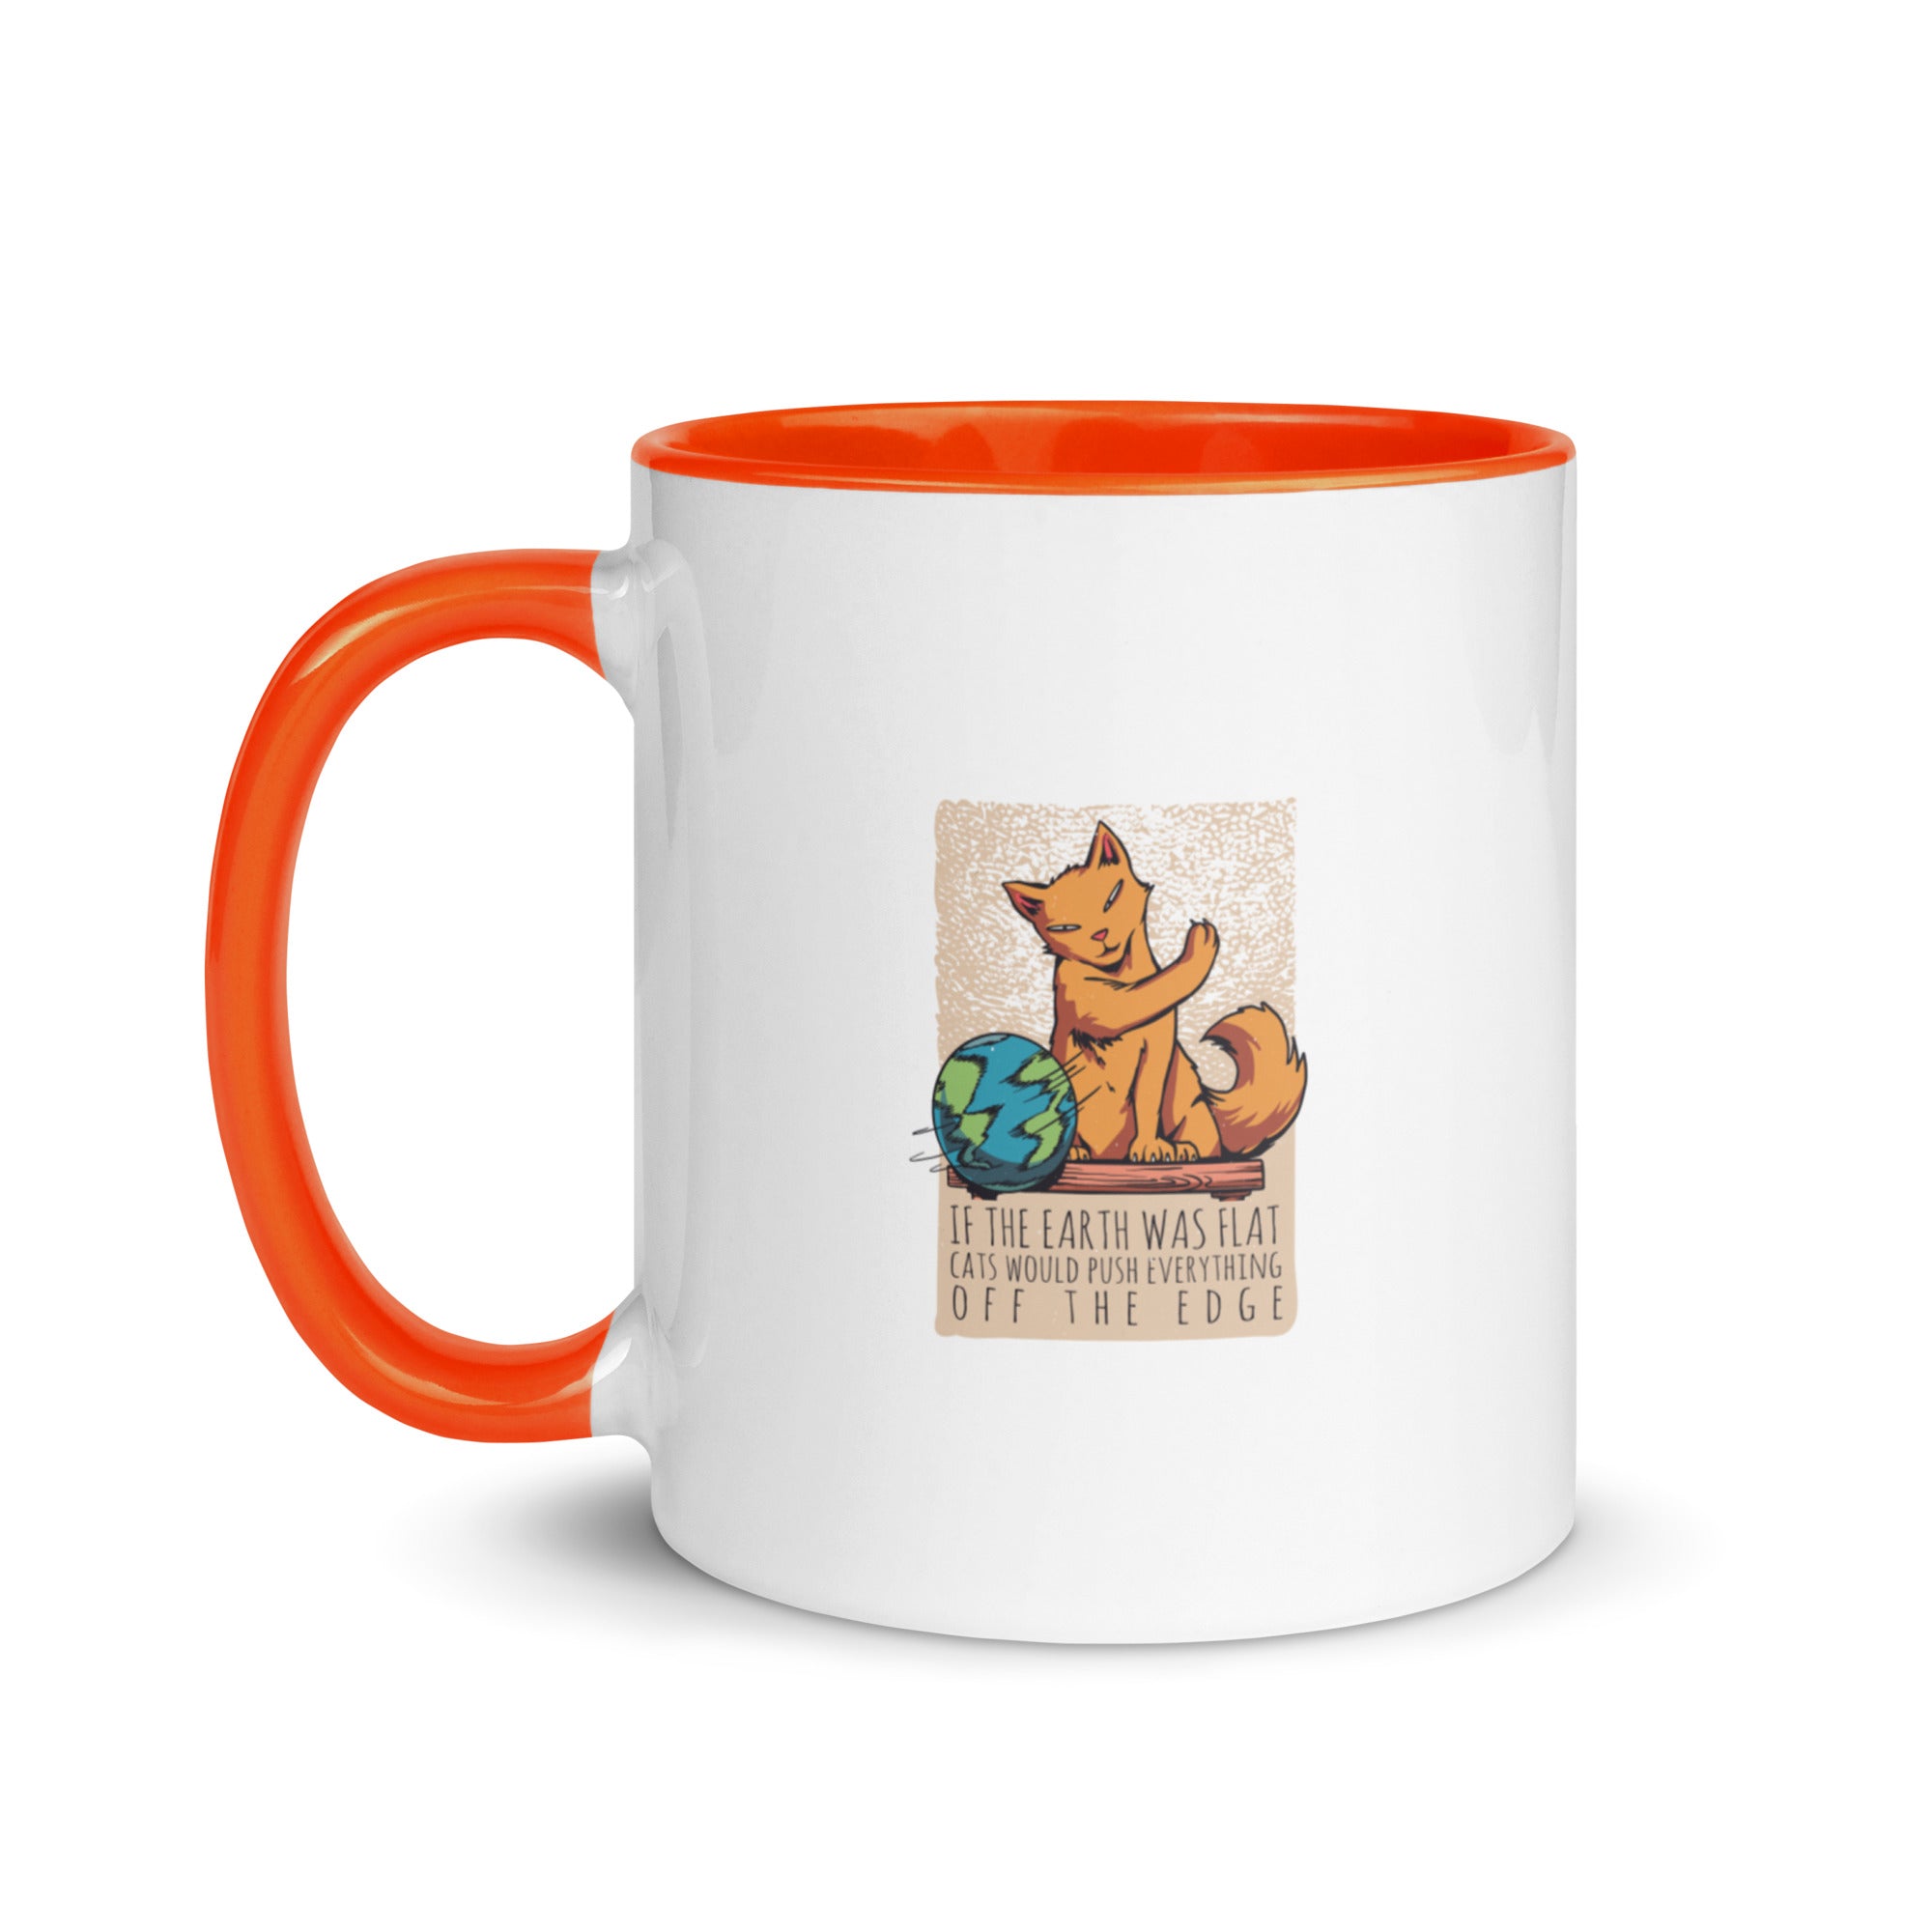 Mug with Color Inside | If the earth was flat, cats would push everything off the edge